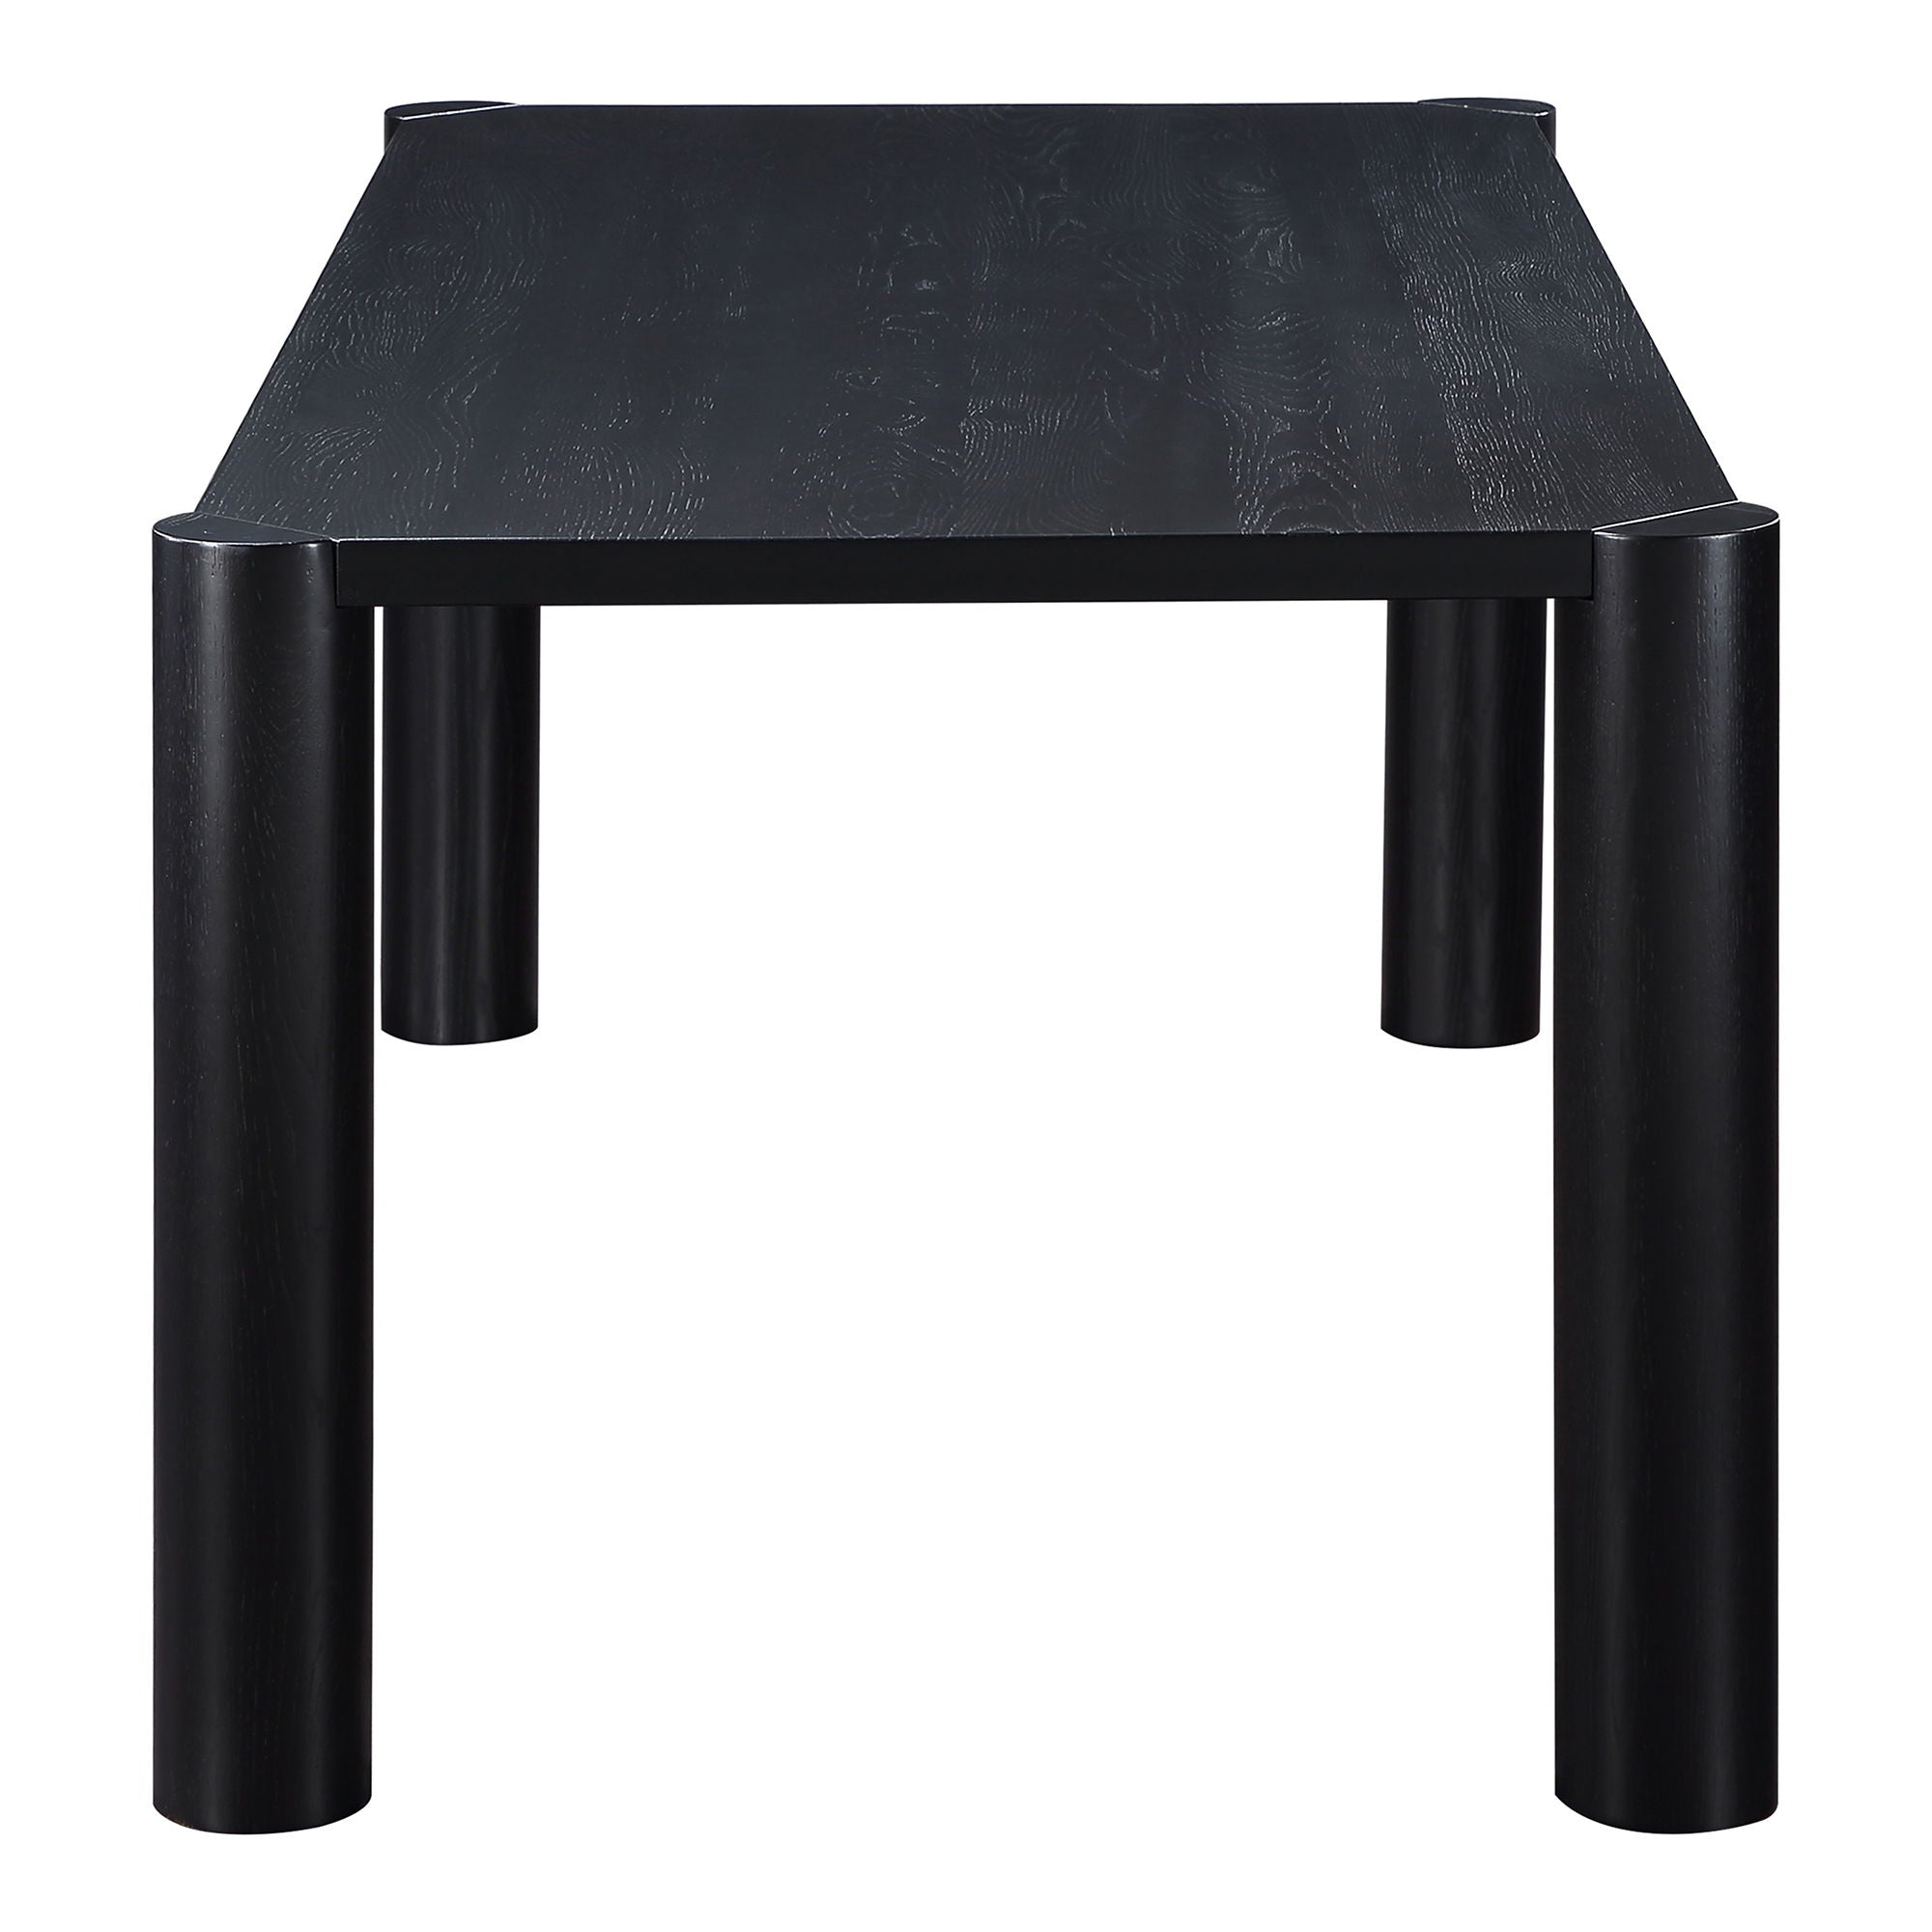 Post - Dining Table Small - Black Oak